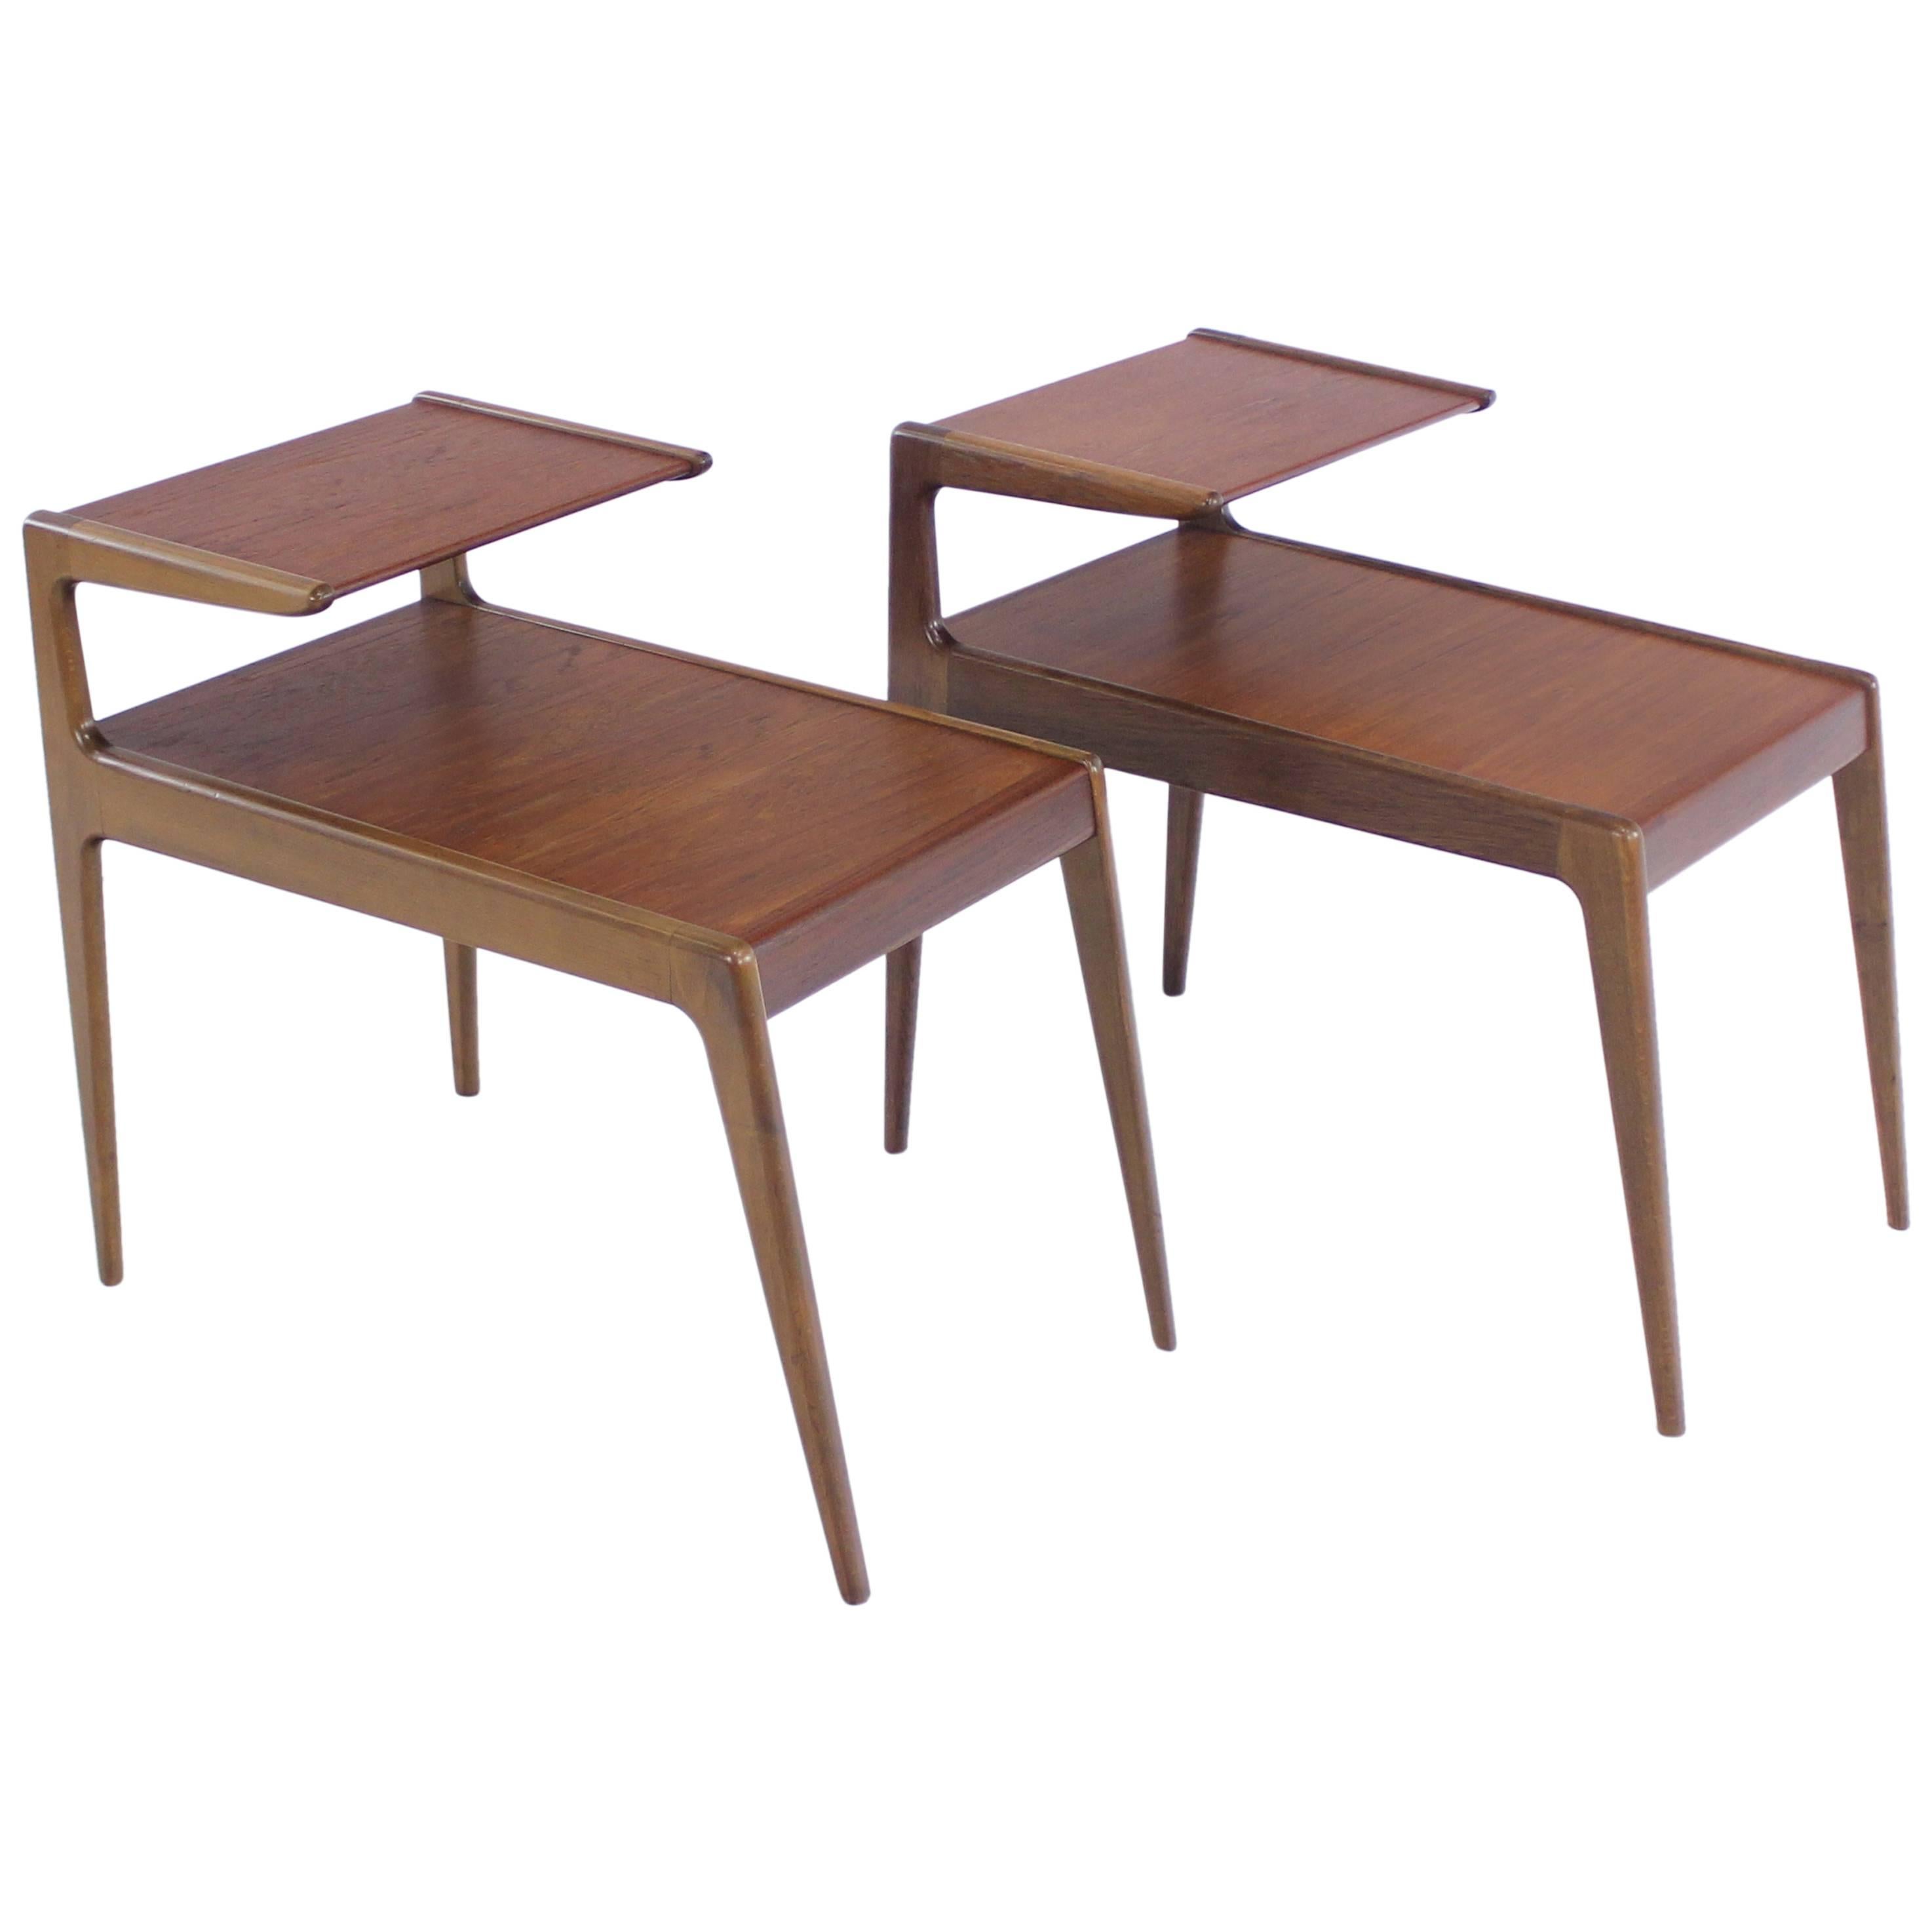 Pair of Danish Modern Teak and Beech End Tables Designed by Kurt Ostervig For Sale